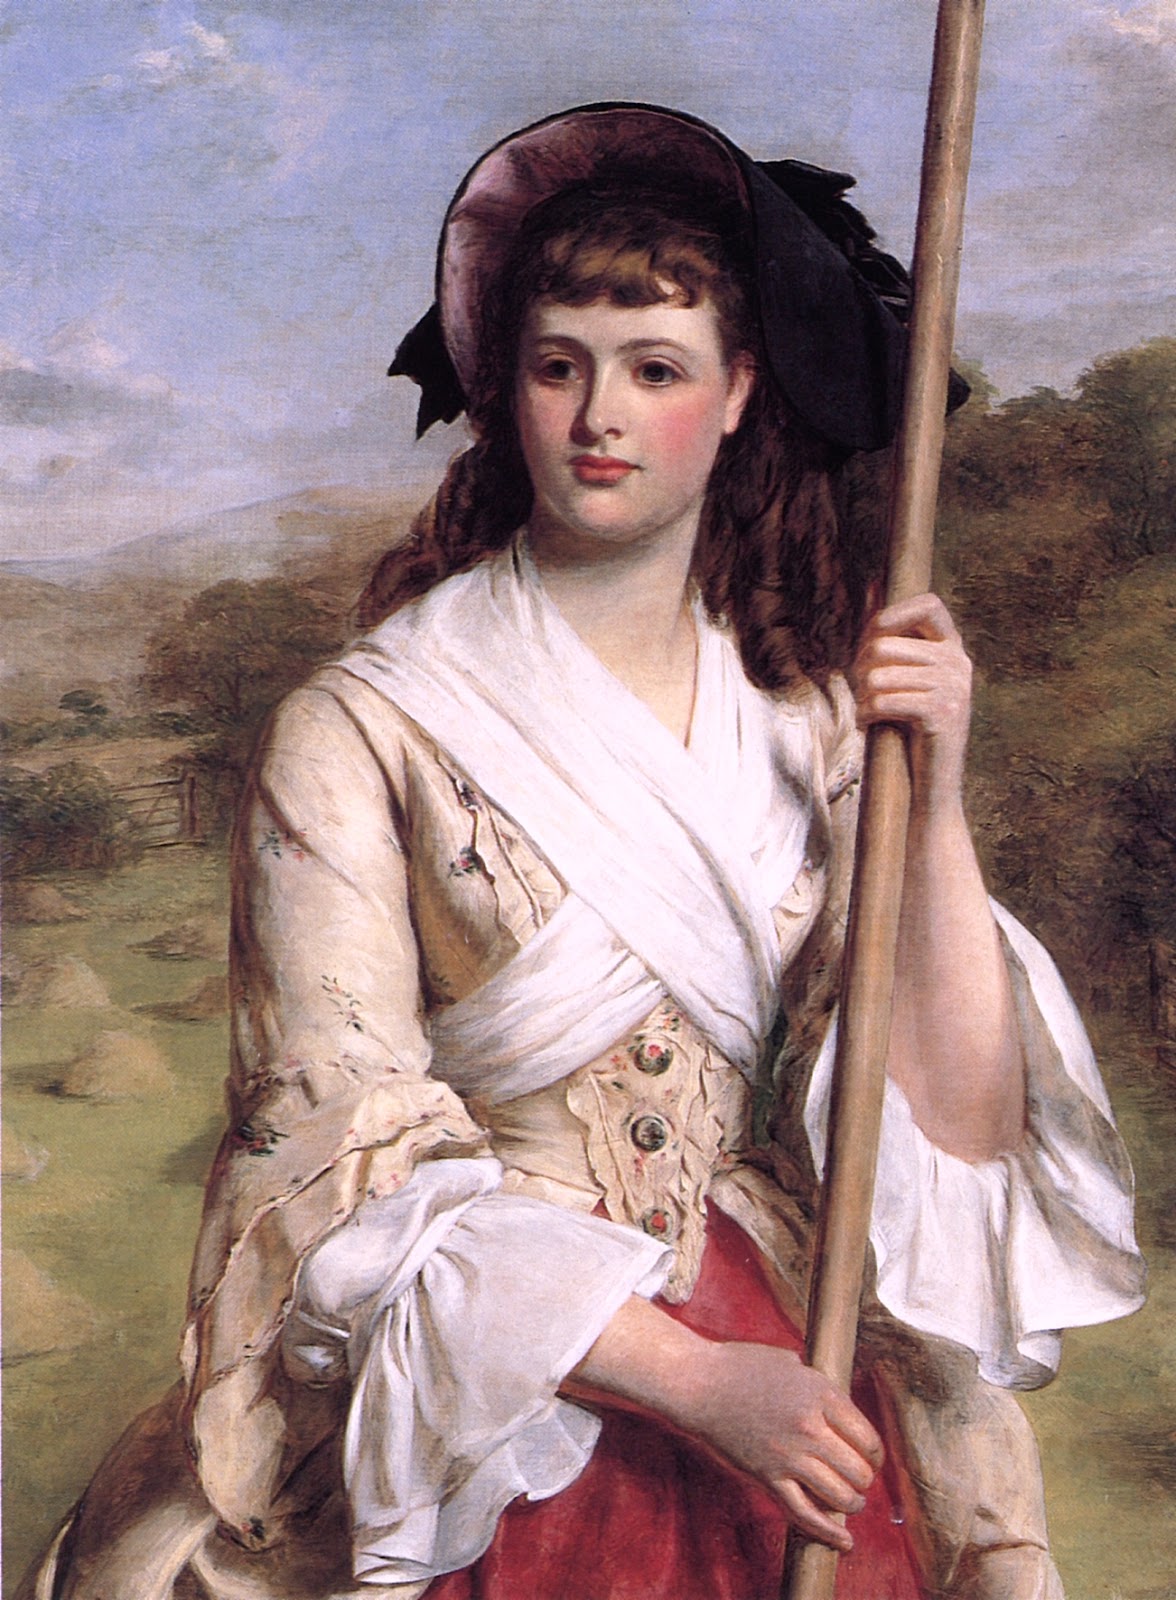 Paintings by William Powell Frith